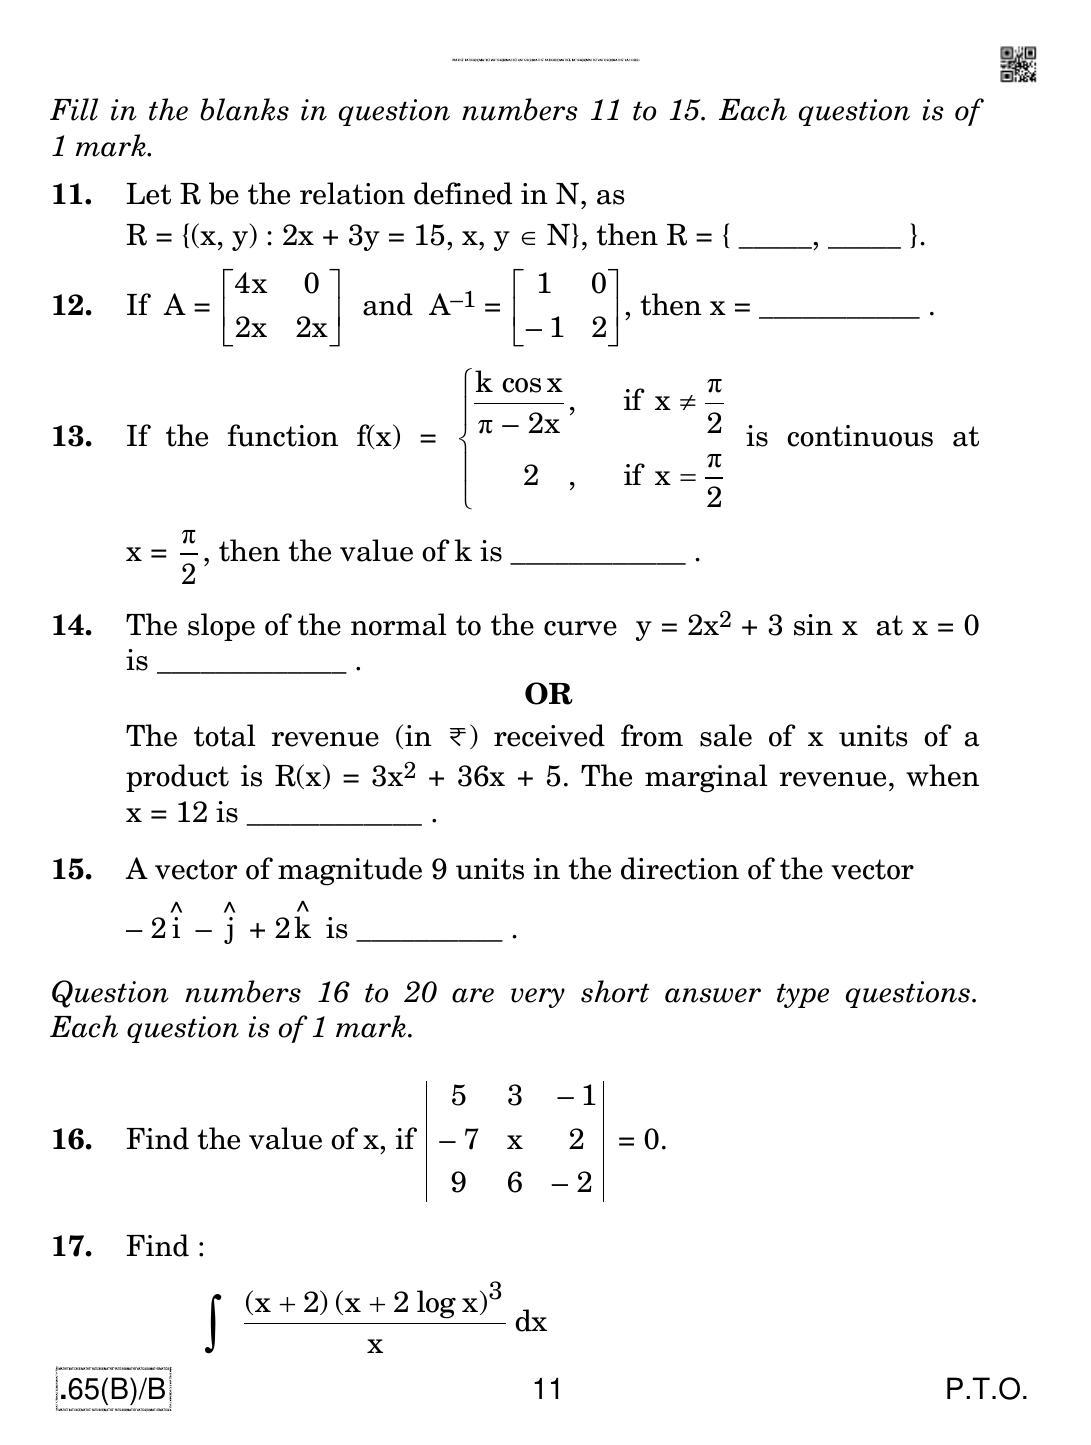 CBSE Class 12 65(B)-C - Maths For Blind Candidates 2020 Compartment Question Paper - Page 11